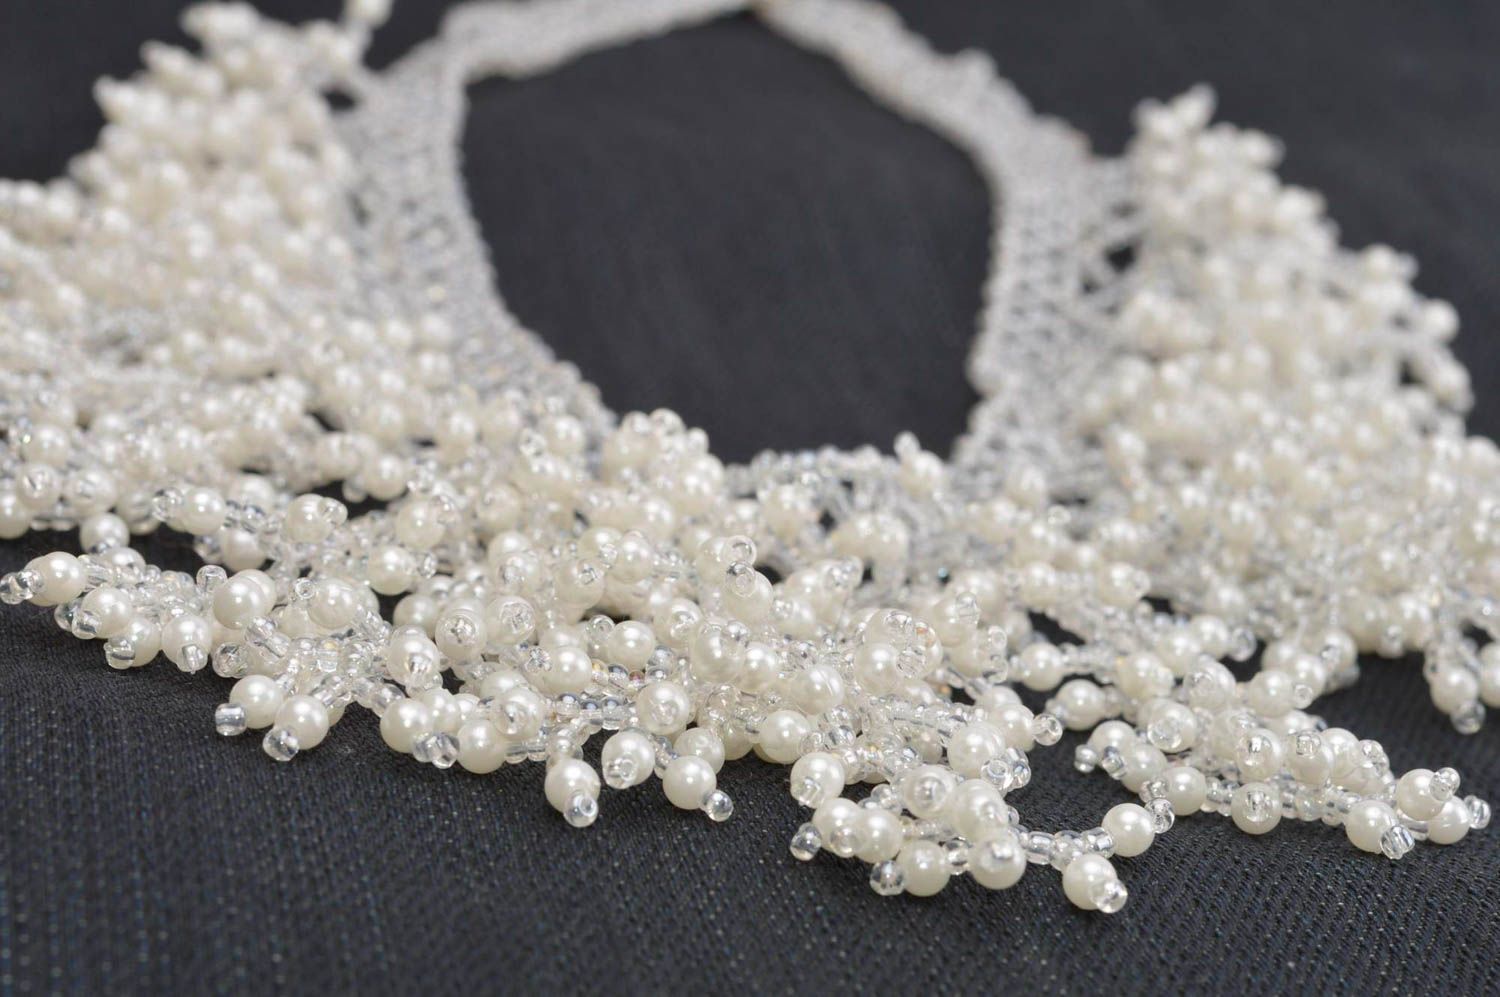 Delicate necklace stylish bijouterie seed bead necklace fashion necklace photo 4